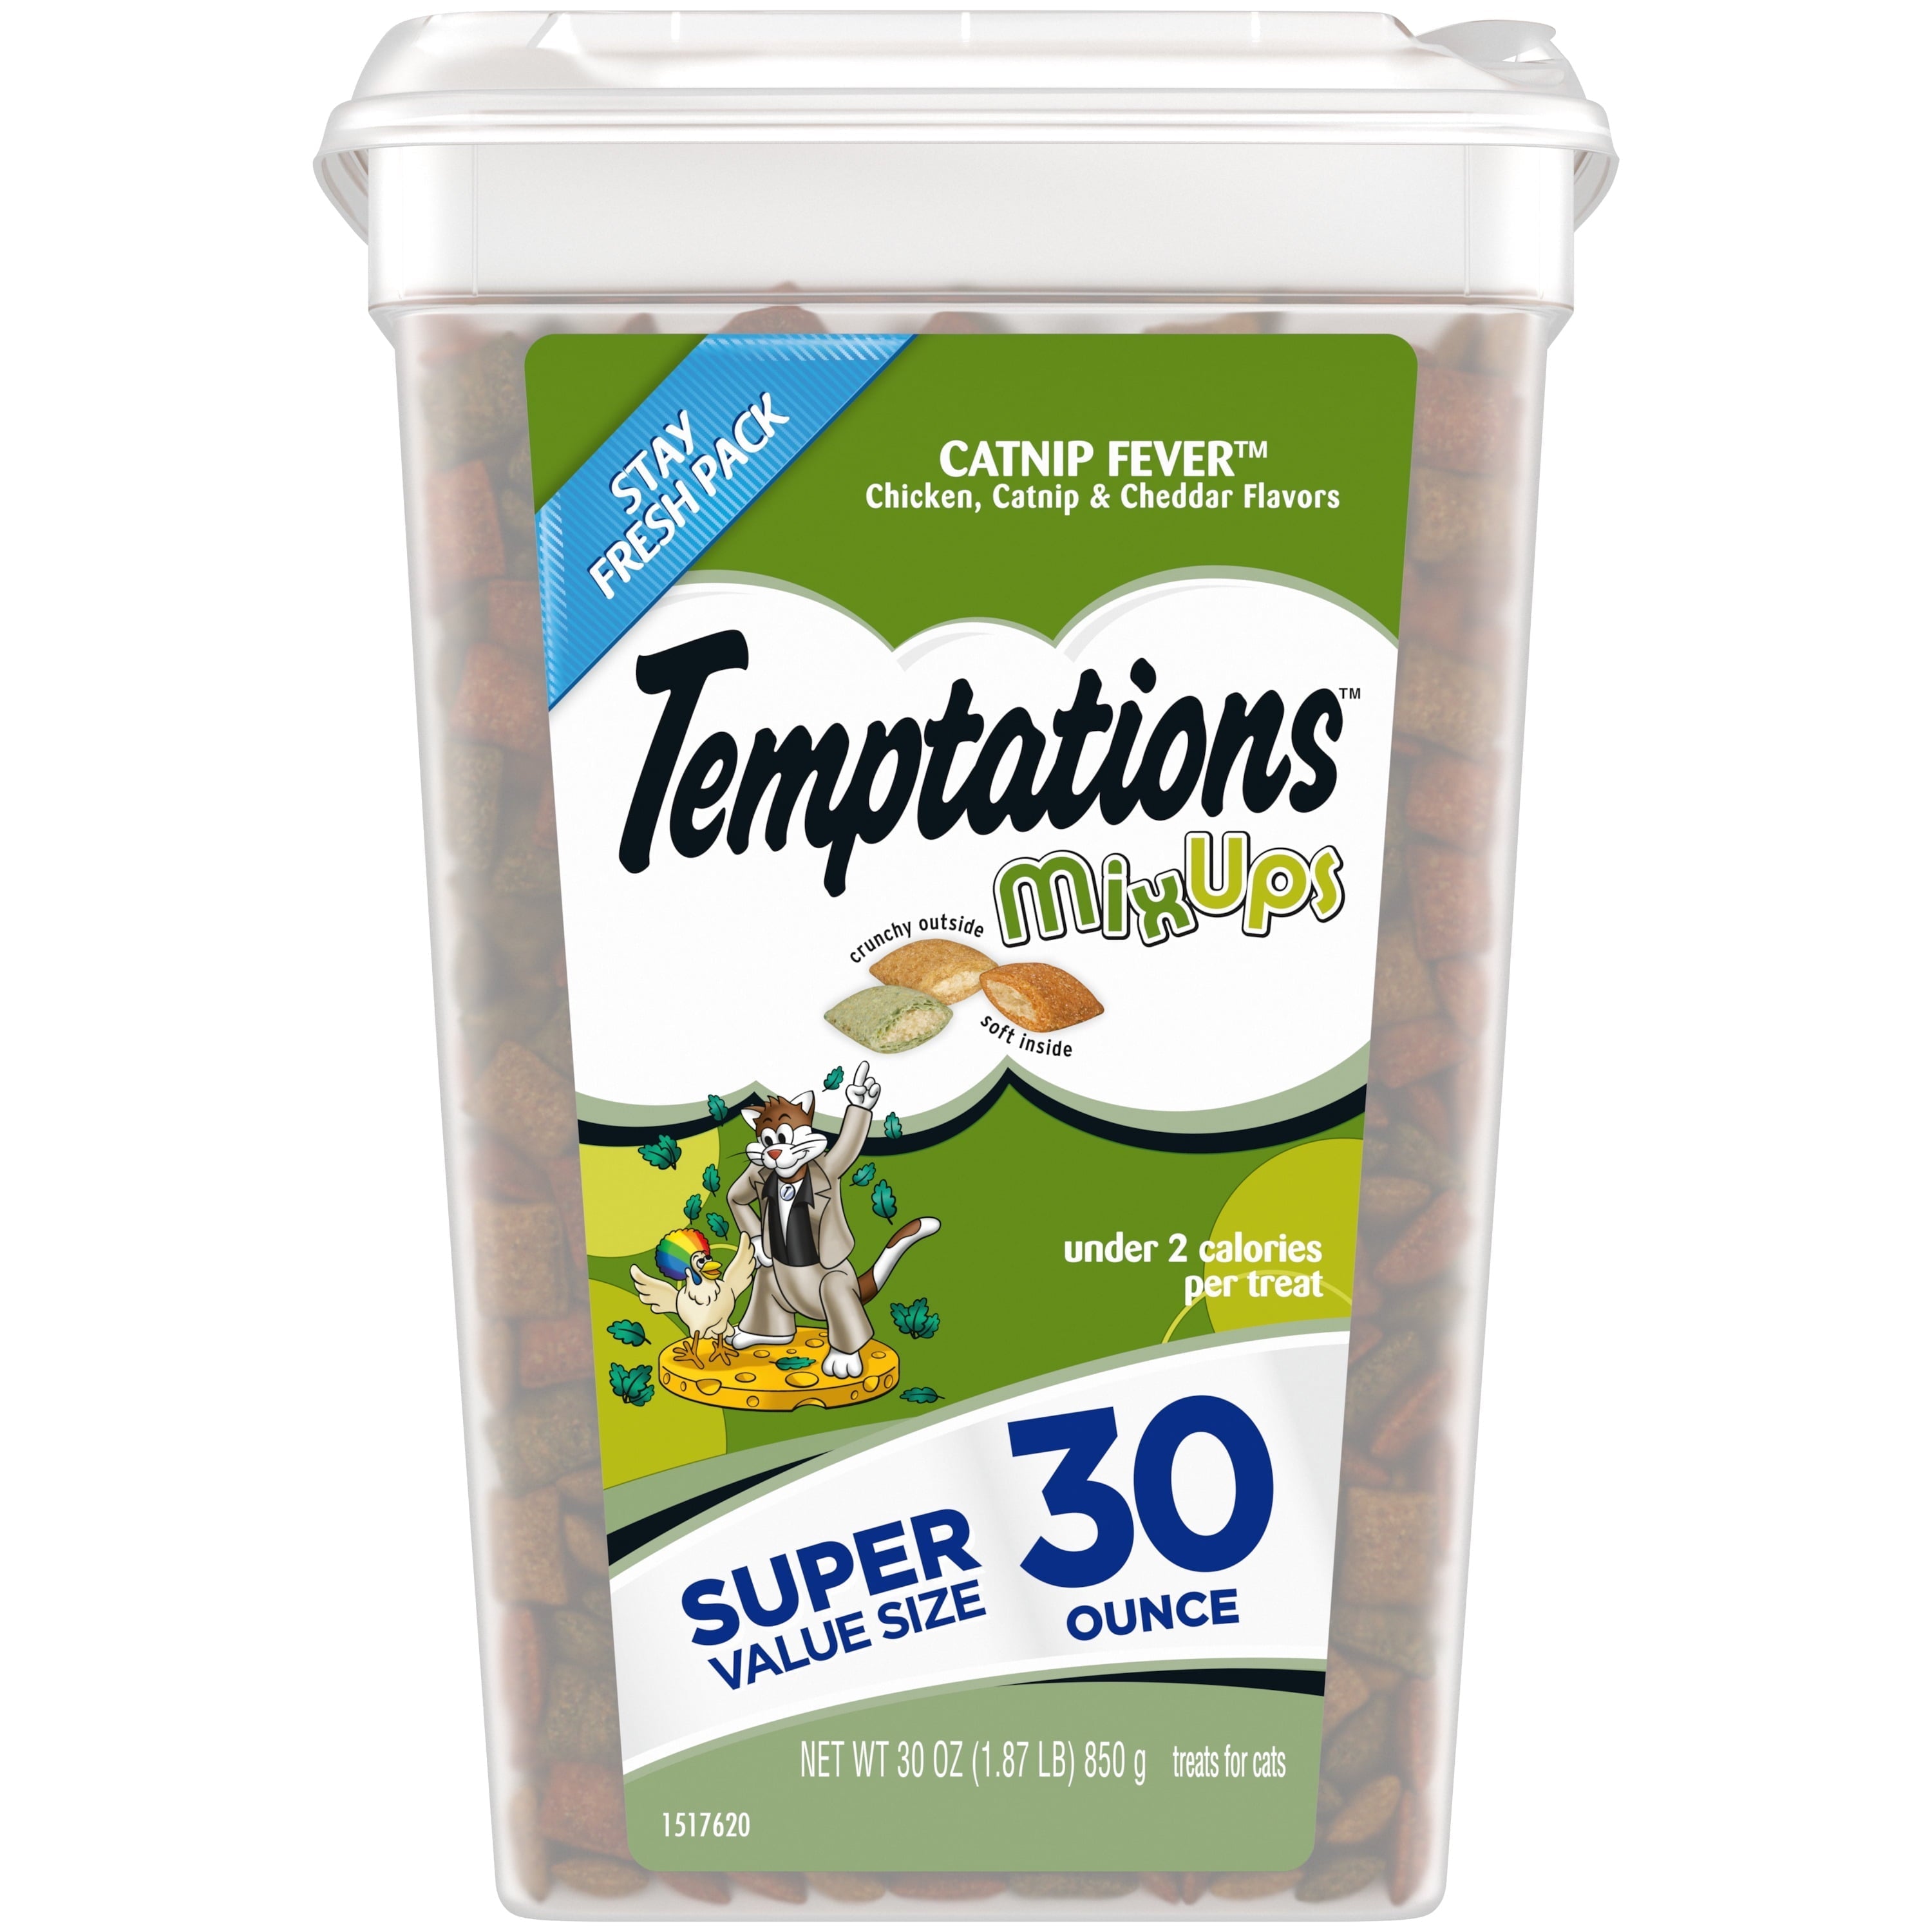 Wholesale prices with free shipping all over United States Temptations Mixups Catnip Fever Flavor Crunchy and Soft Treats for Cats, 30 oz. Tub - Steven Deals